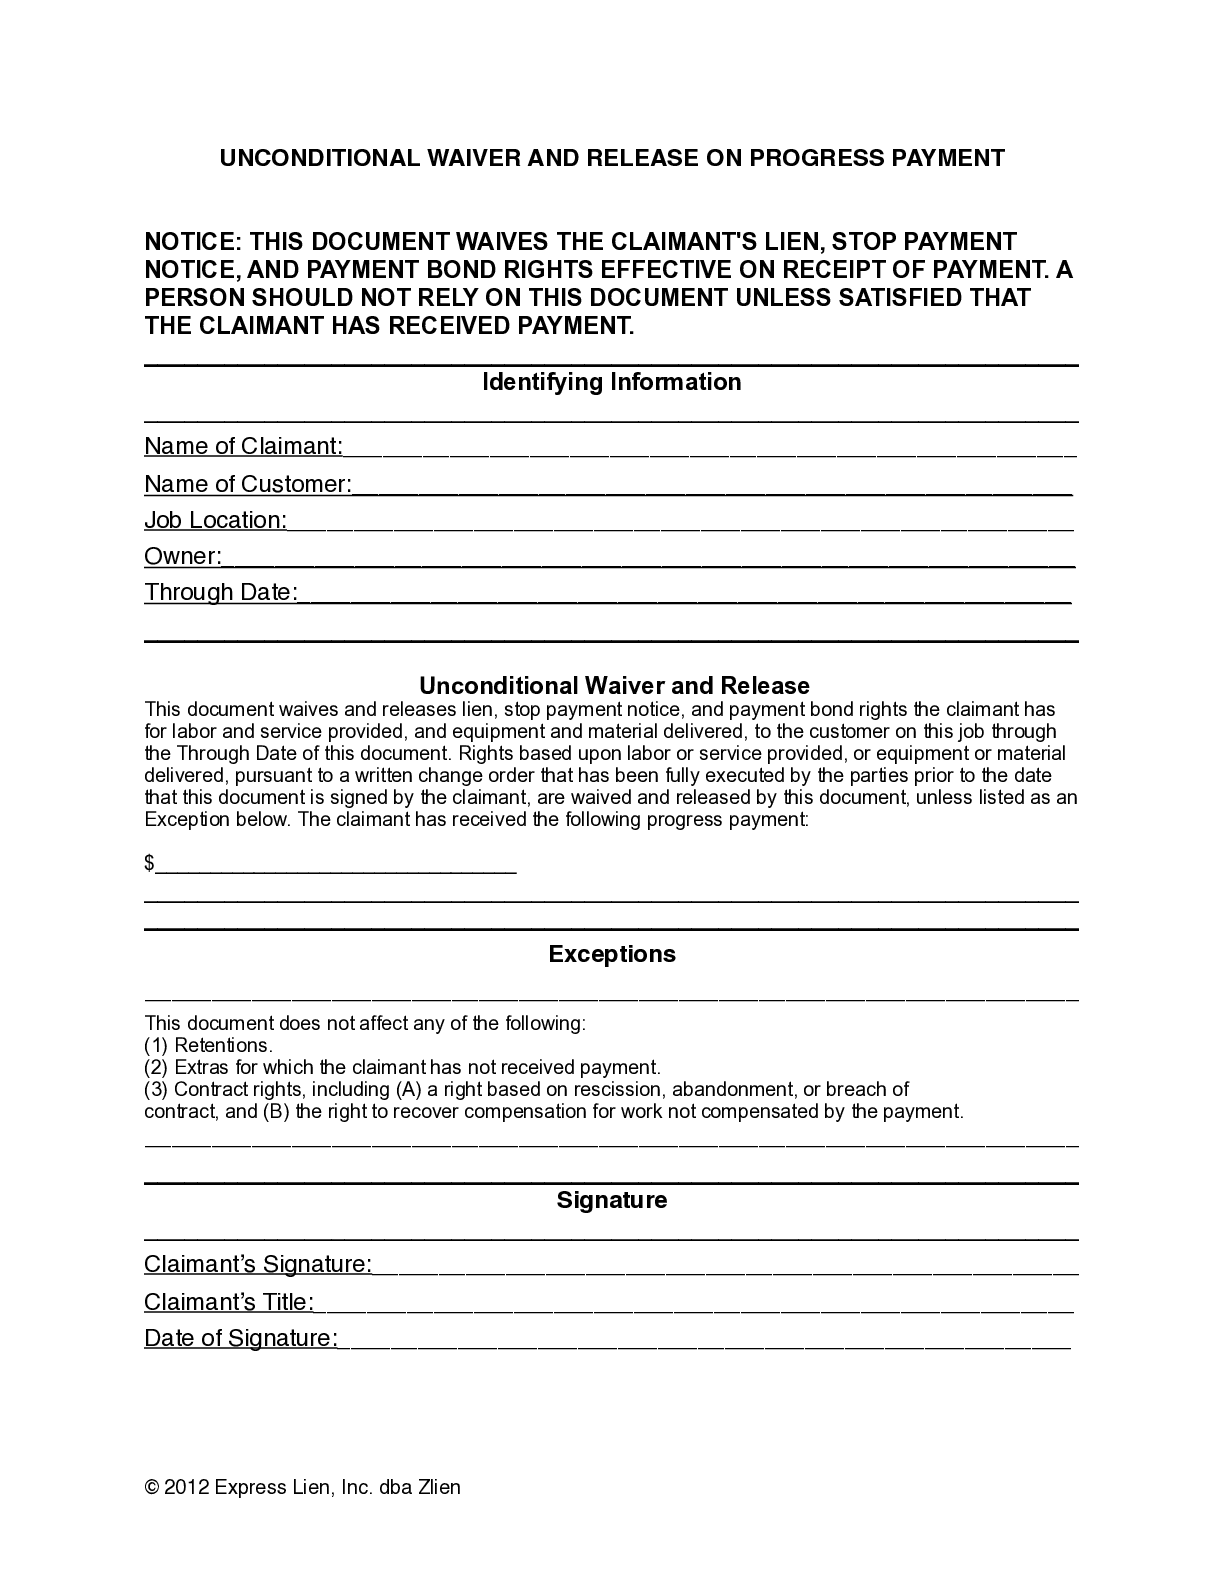 New York Partial Unconditional Lien Waiver Form - free from